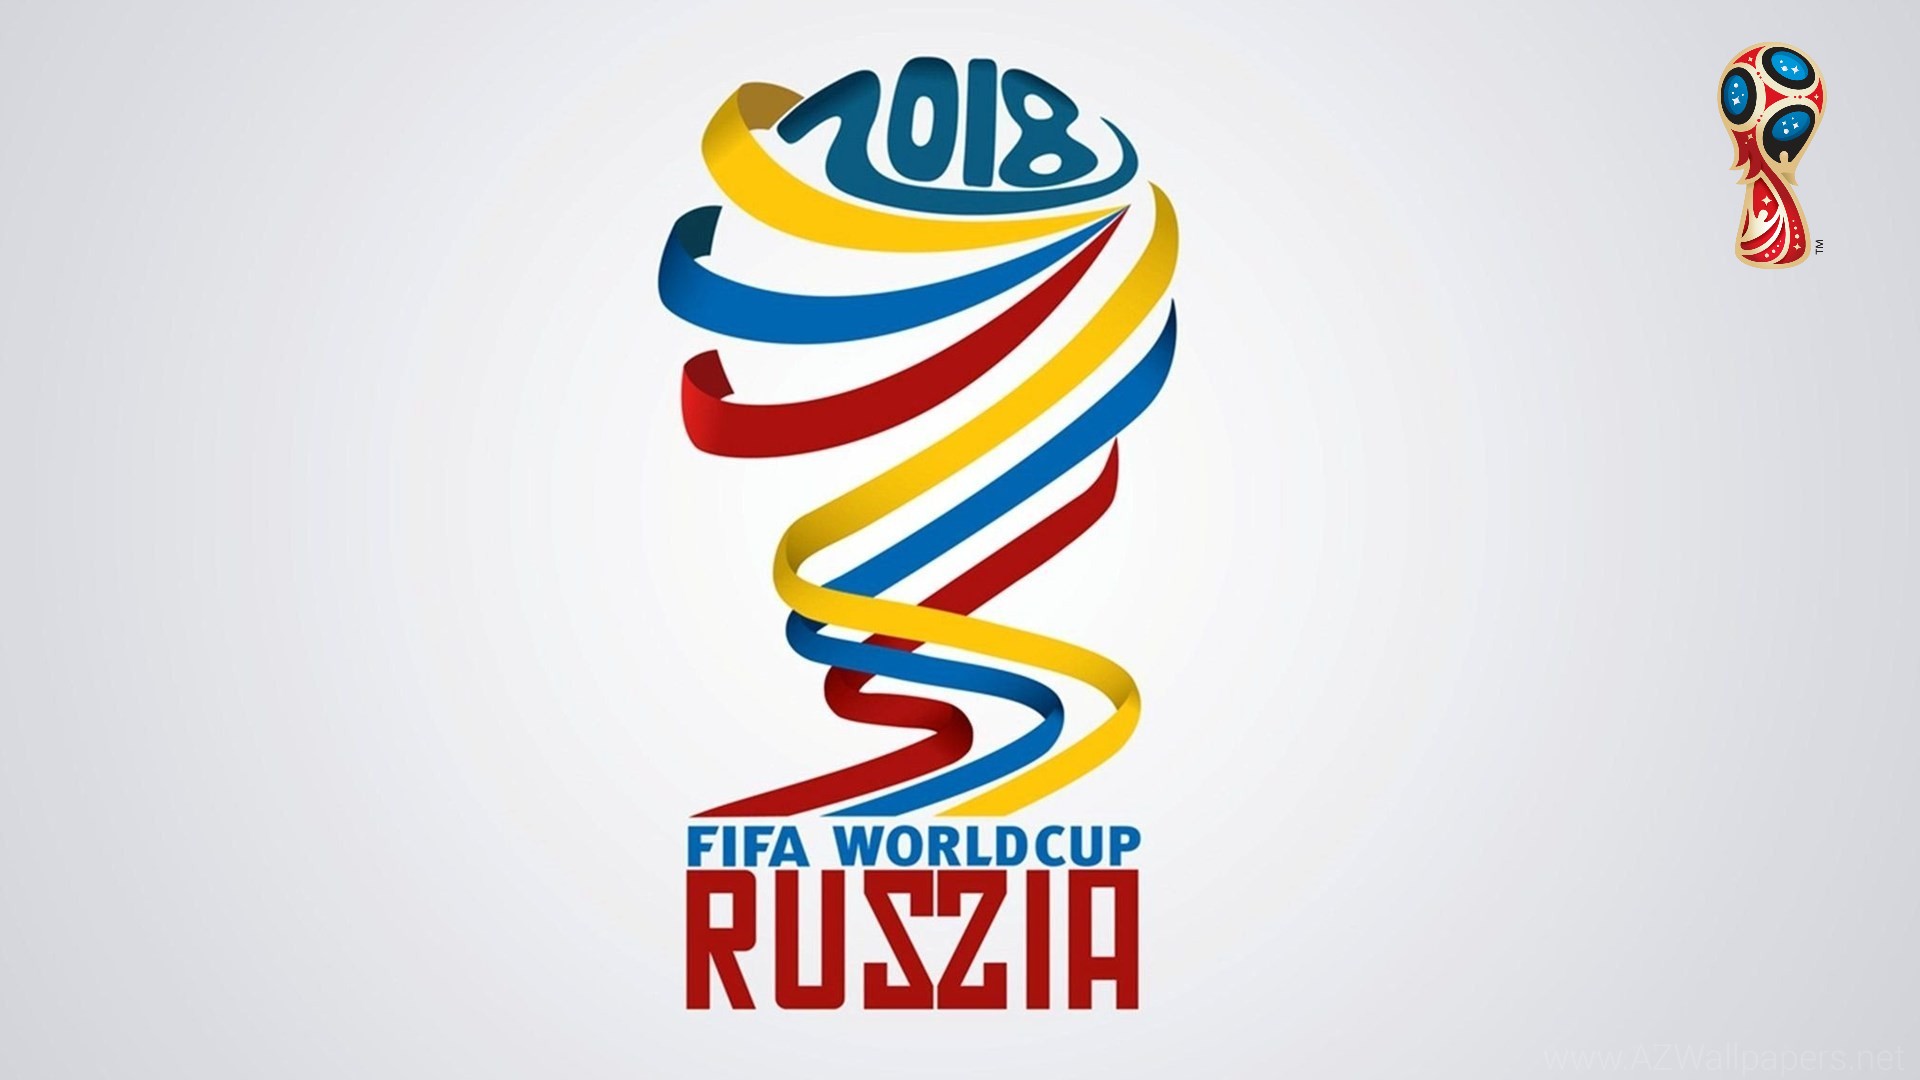 2018 World Cup Wallpaper HD With Resolution 1920X1080 pixel. You can make this wallpaper for your Mac or Windows Desktop Background, iPhone, Android or Tablet and another Smartphone device for free